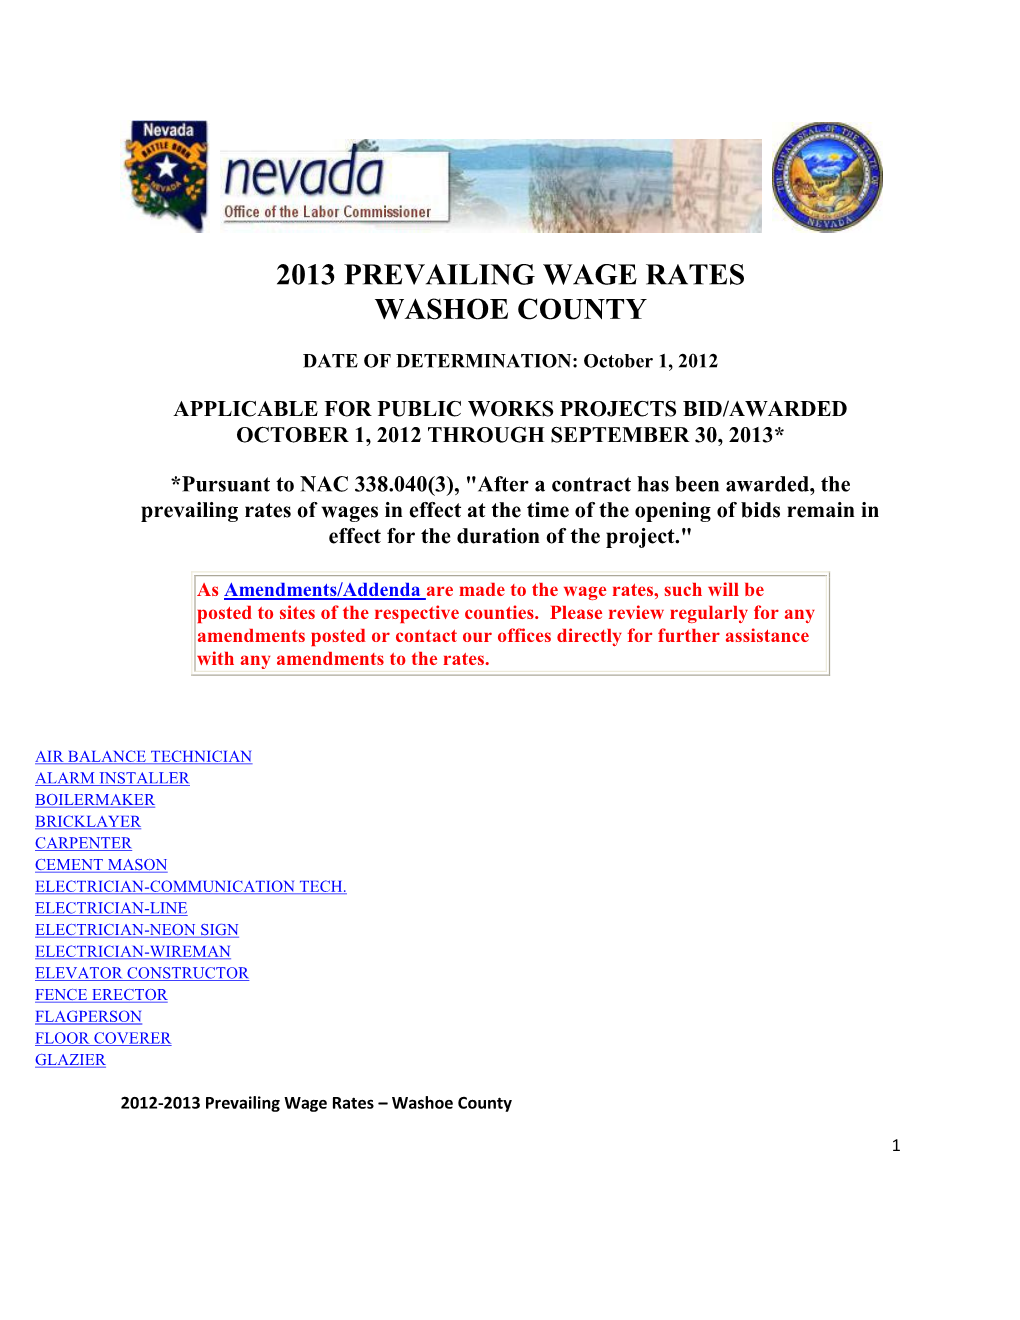 2013 Prevailing Wage Rates Washoe County